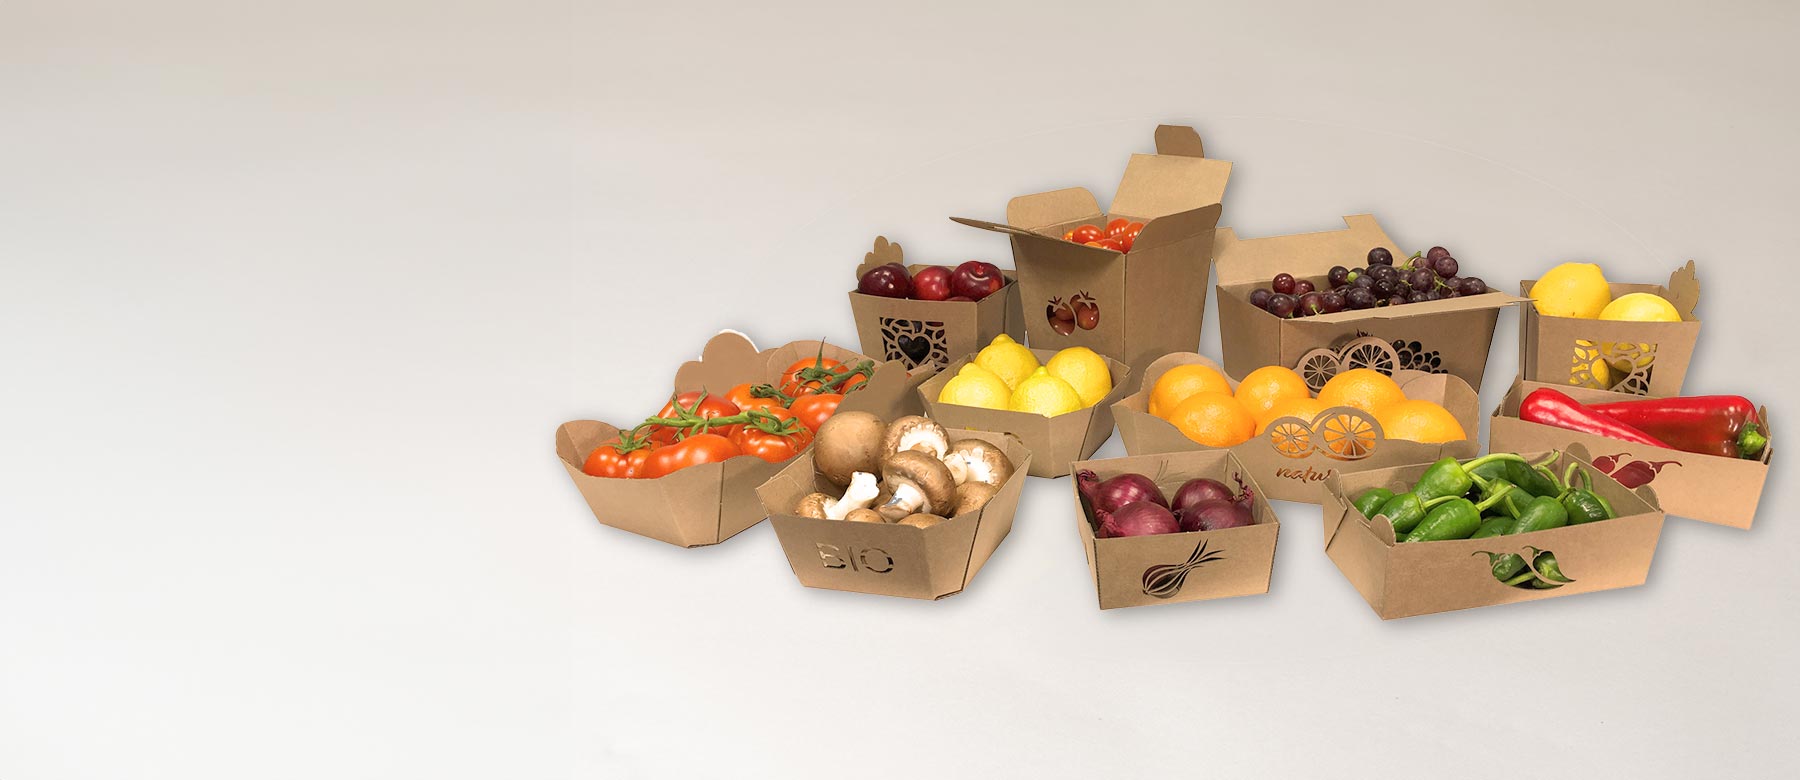 Fruit and vegetable packaging from THIMM